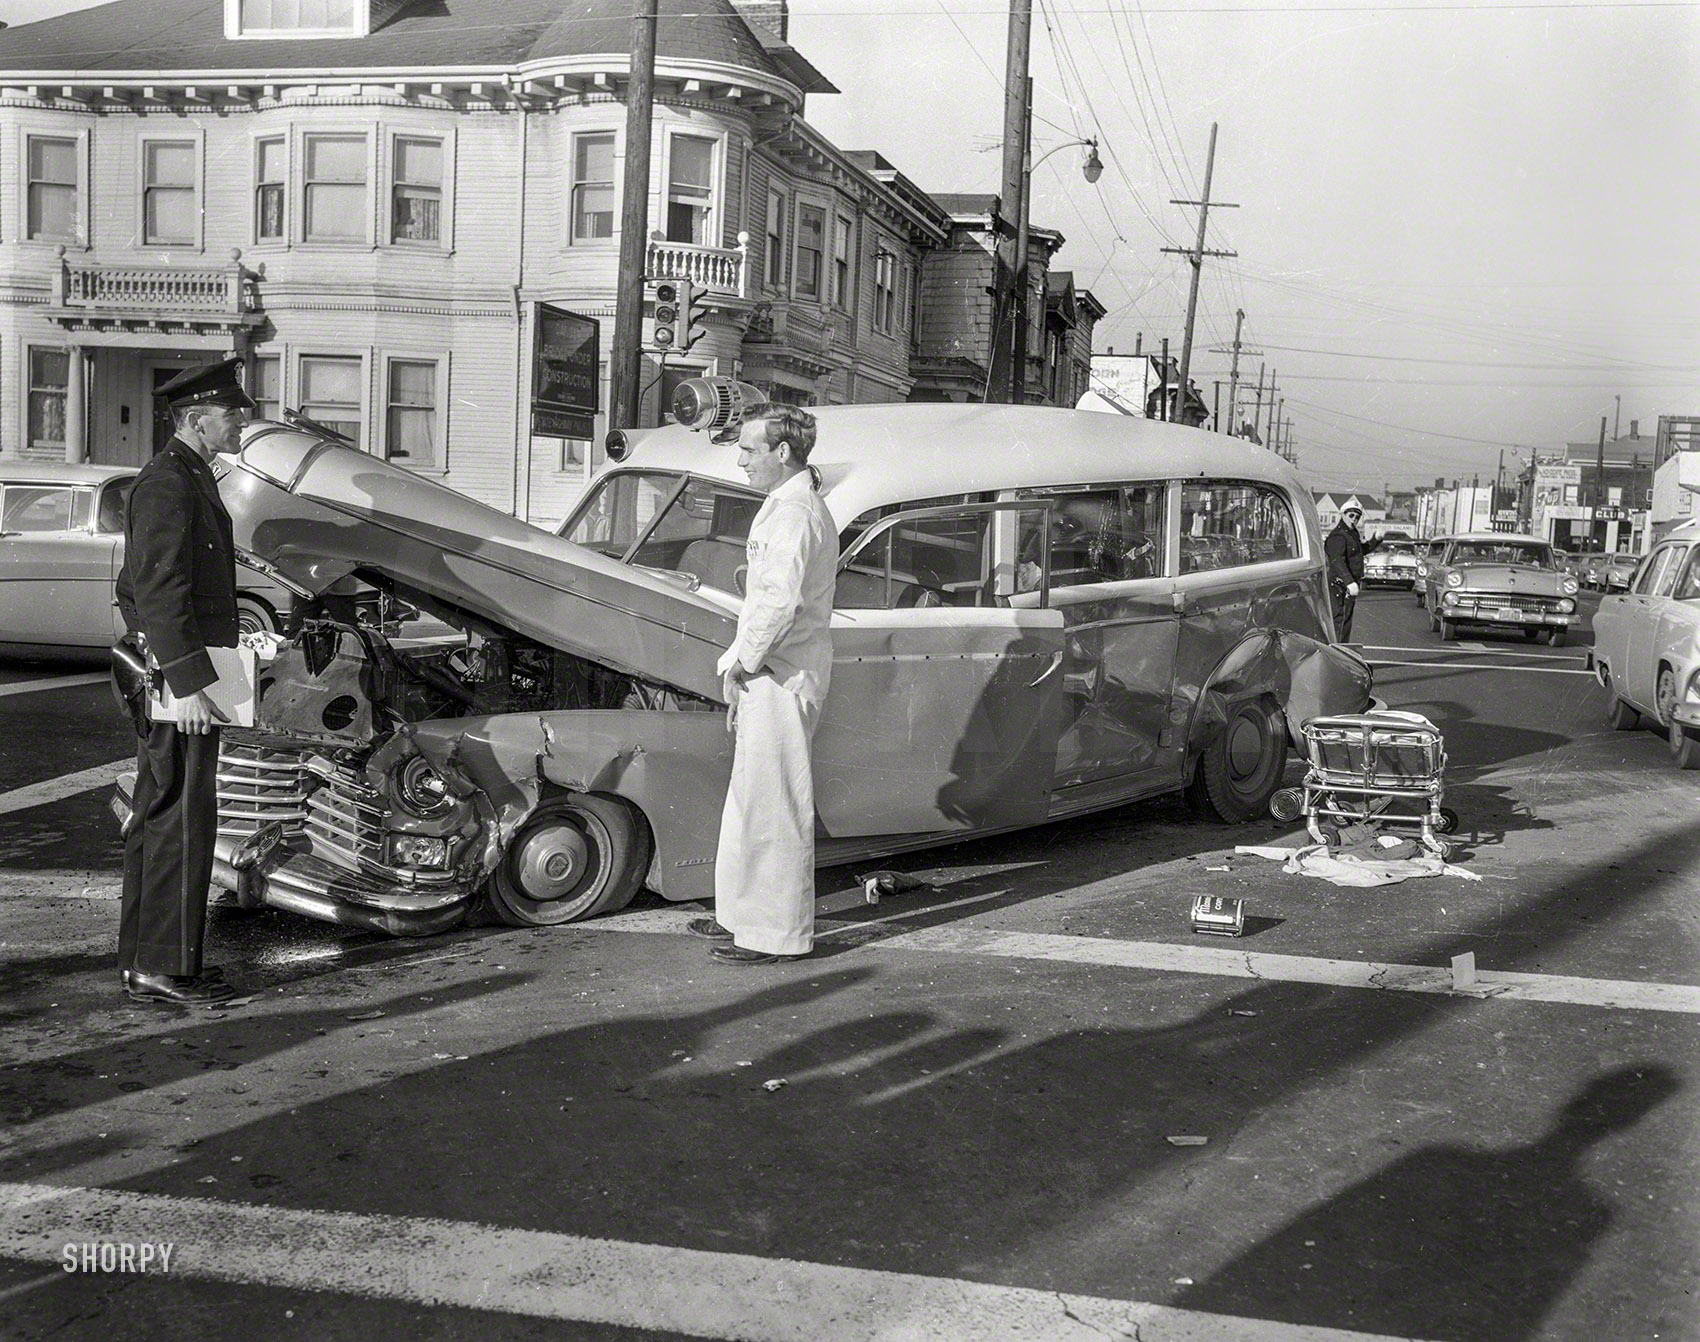 Oakland, California, circa 1957. "Ambulance accident." Don't even ask what happened to the tow truck. 4x5 negative from the News Archive. View full size.